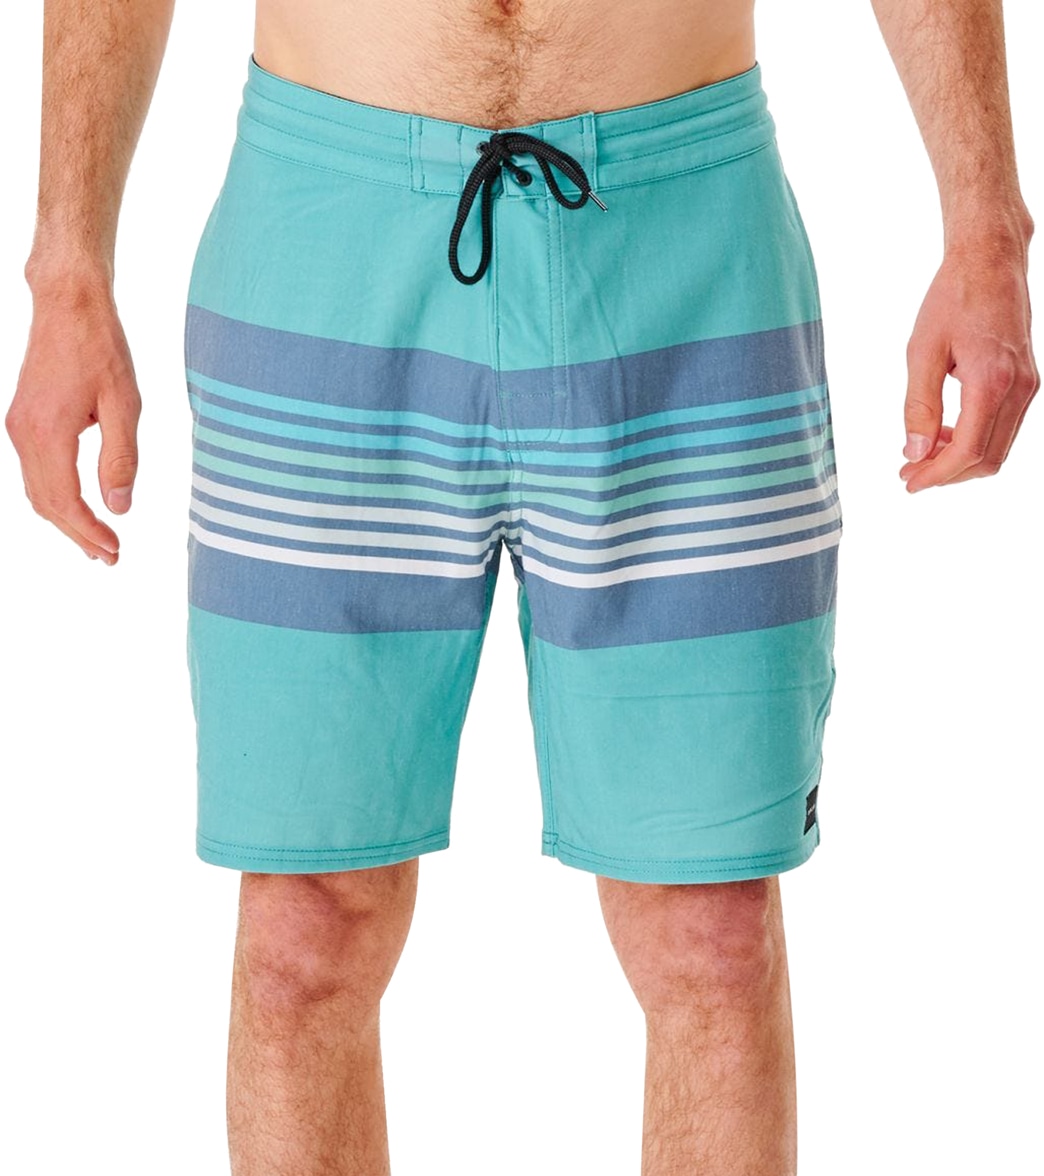 Rip Curl Men's Lineup Layday 19 Boardshorts - Baltic Teal 29 - Swimoutlet.com